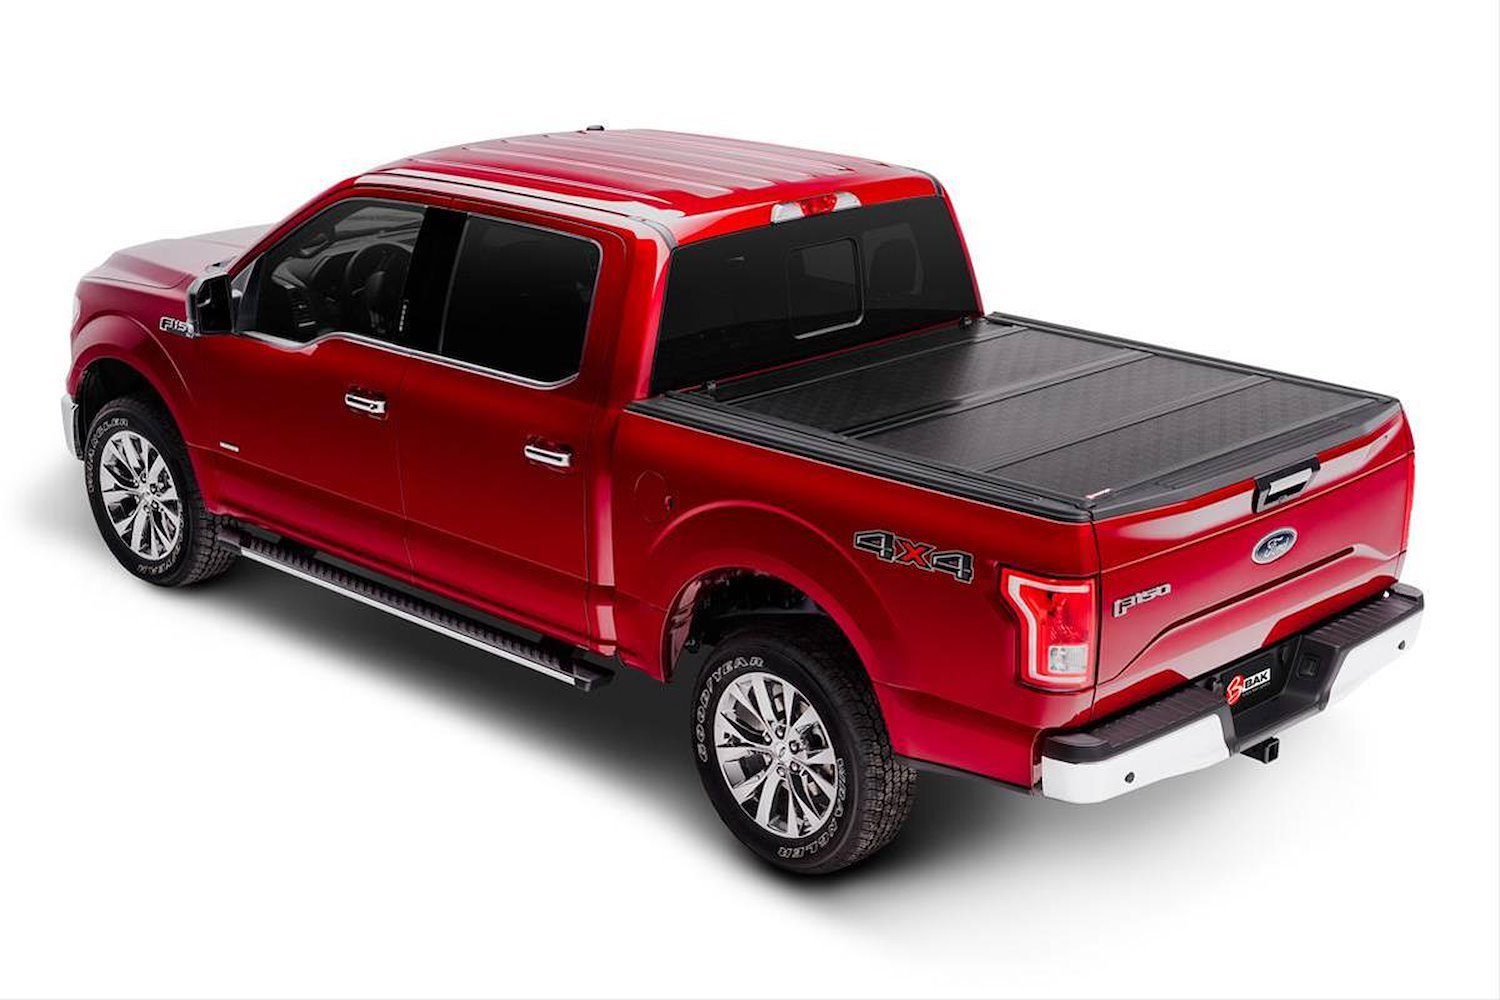 226331 BAKFlip G2 for Fits Select Ford Super-Duty 8.2 ft. Bed, Hard Folding Cover Style [Black Finish]